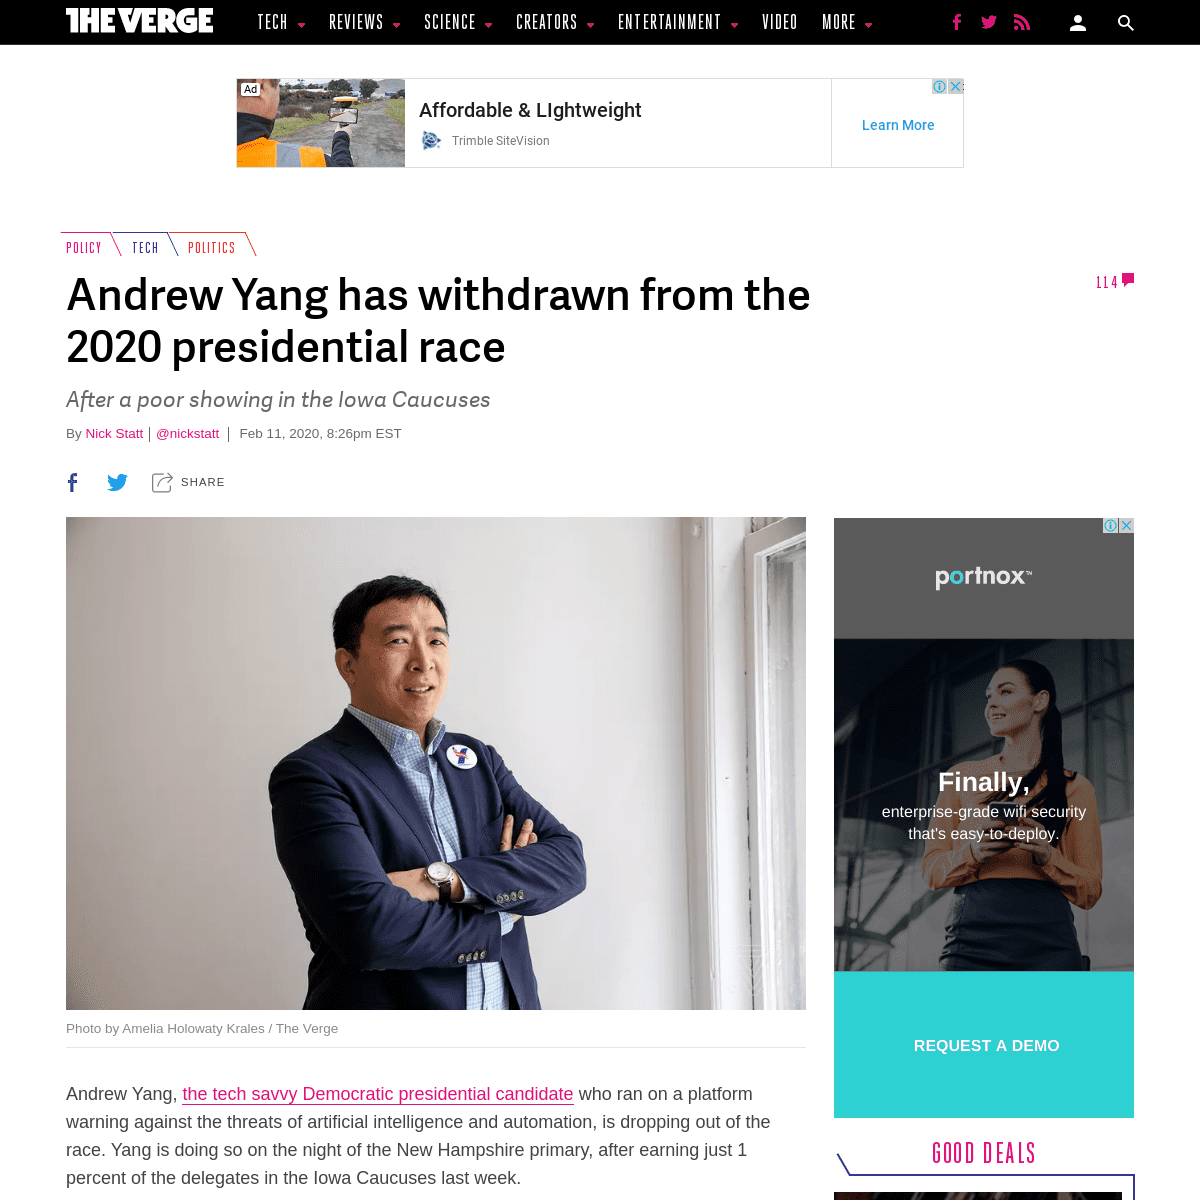 A complete backup of www.theverge.com/2020/2/11/21134021/andrew-yang-drops-out-2020-presidential-race-democratic